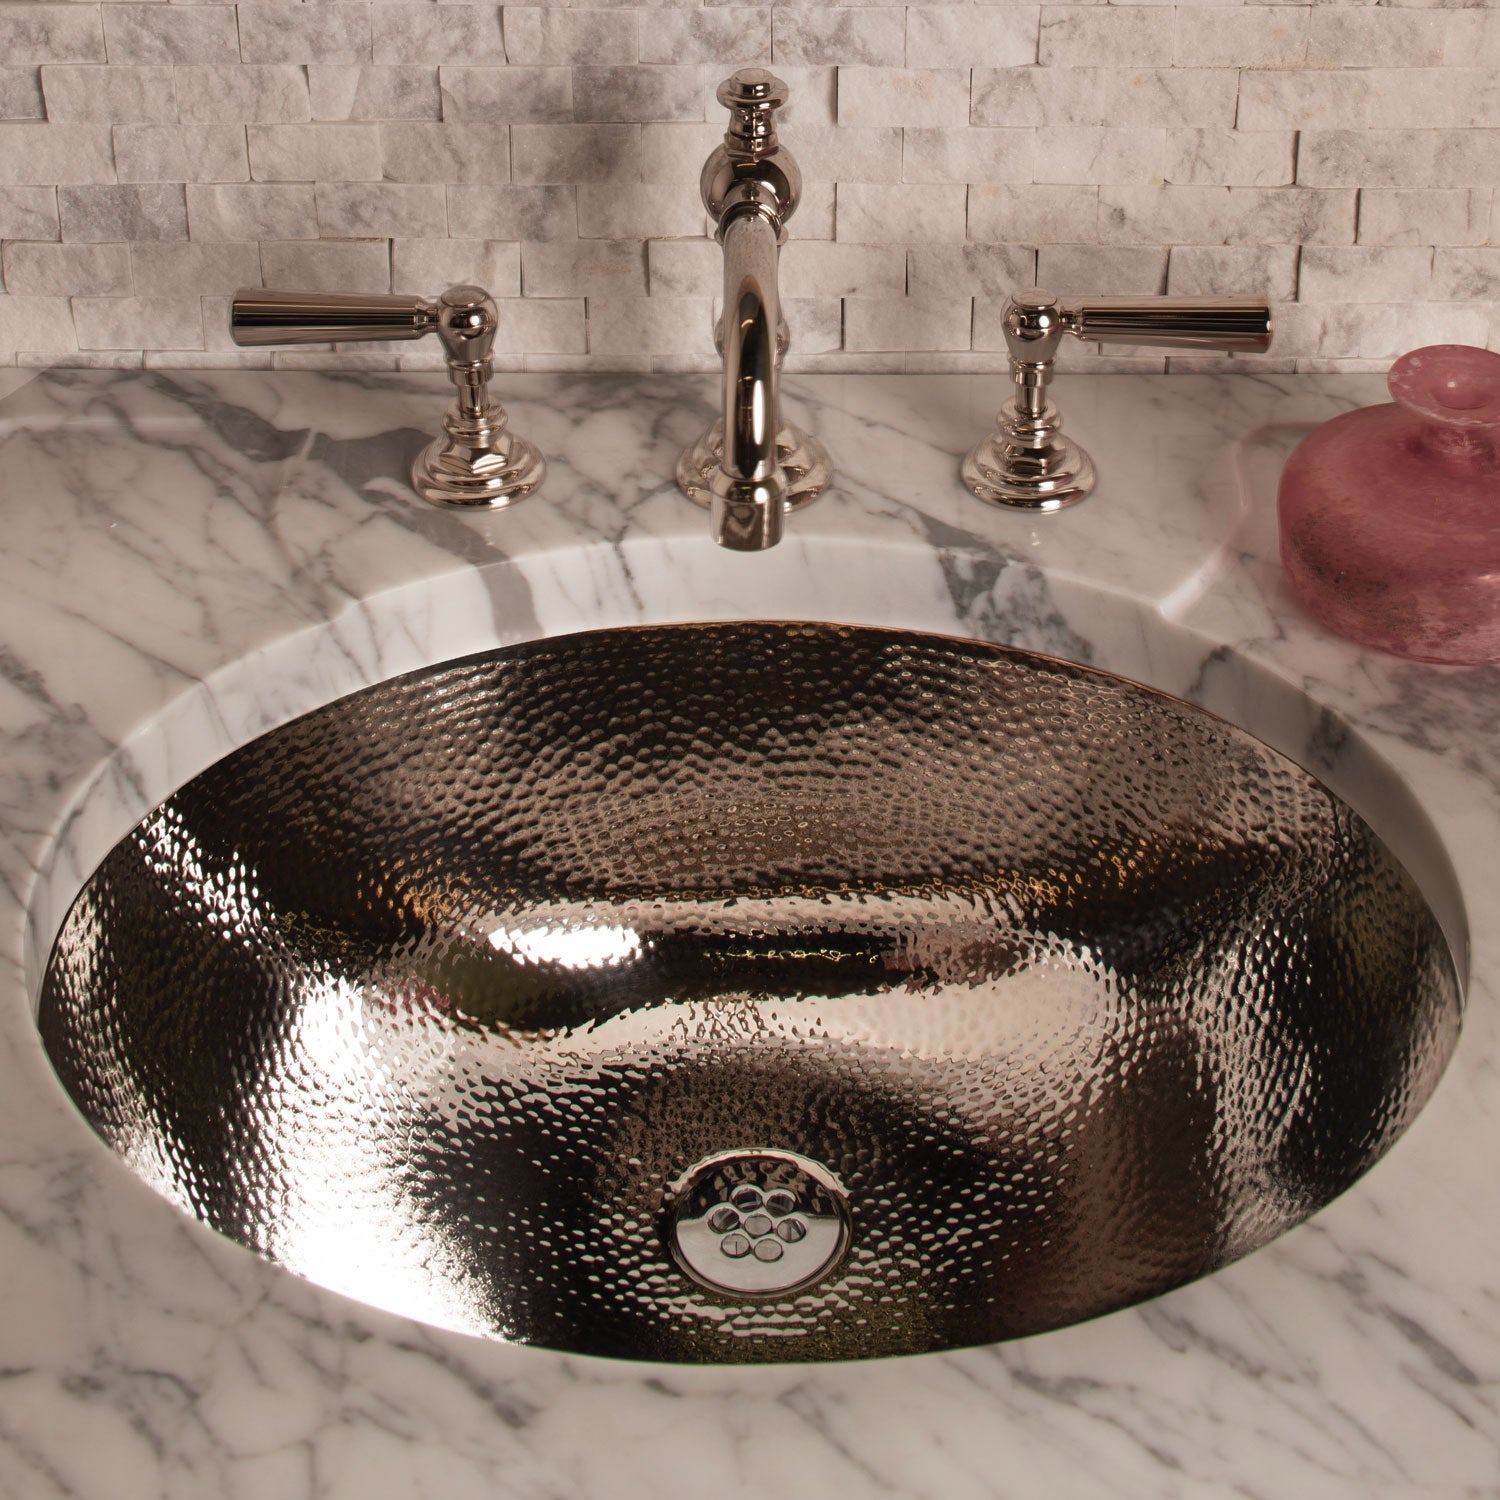 polished stainless steel sink